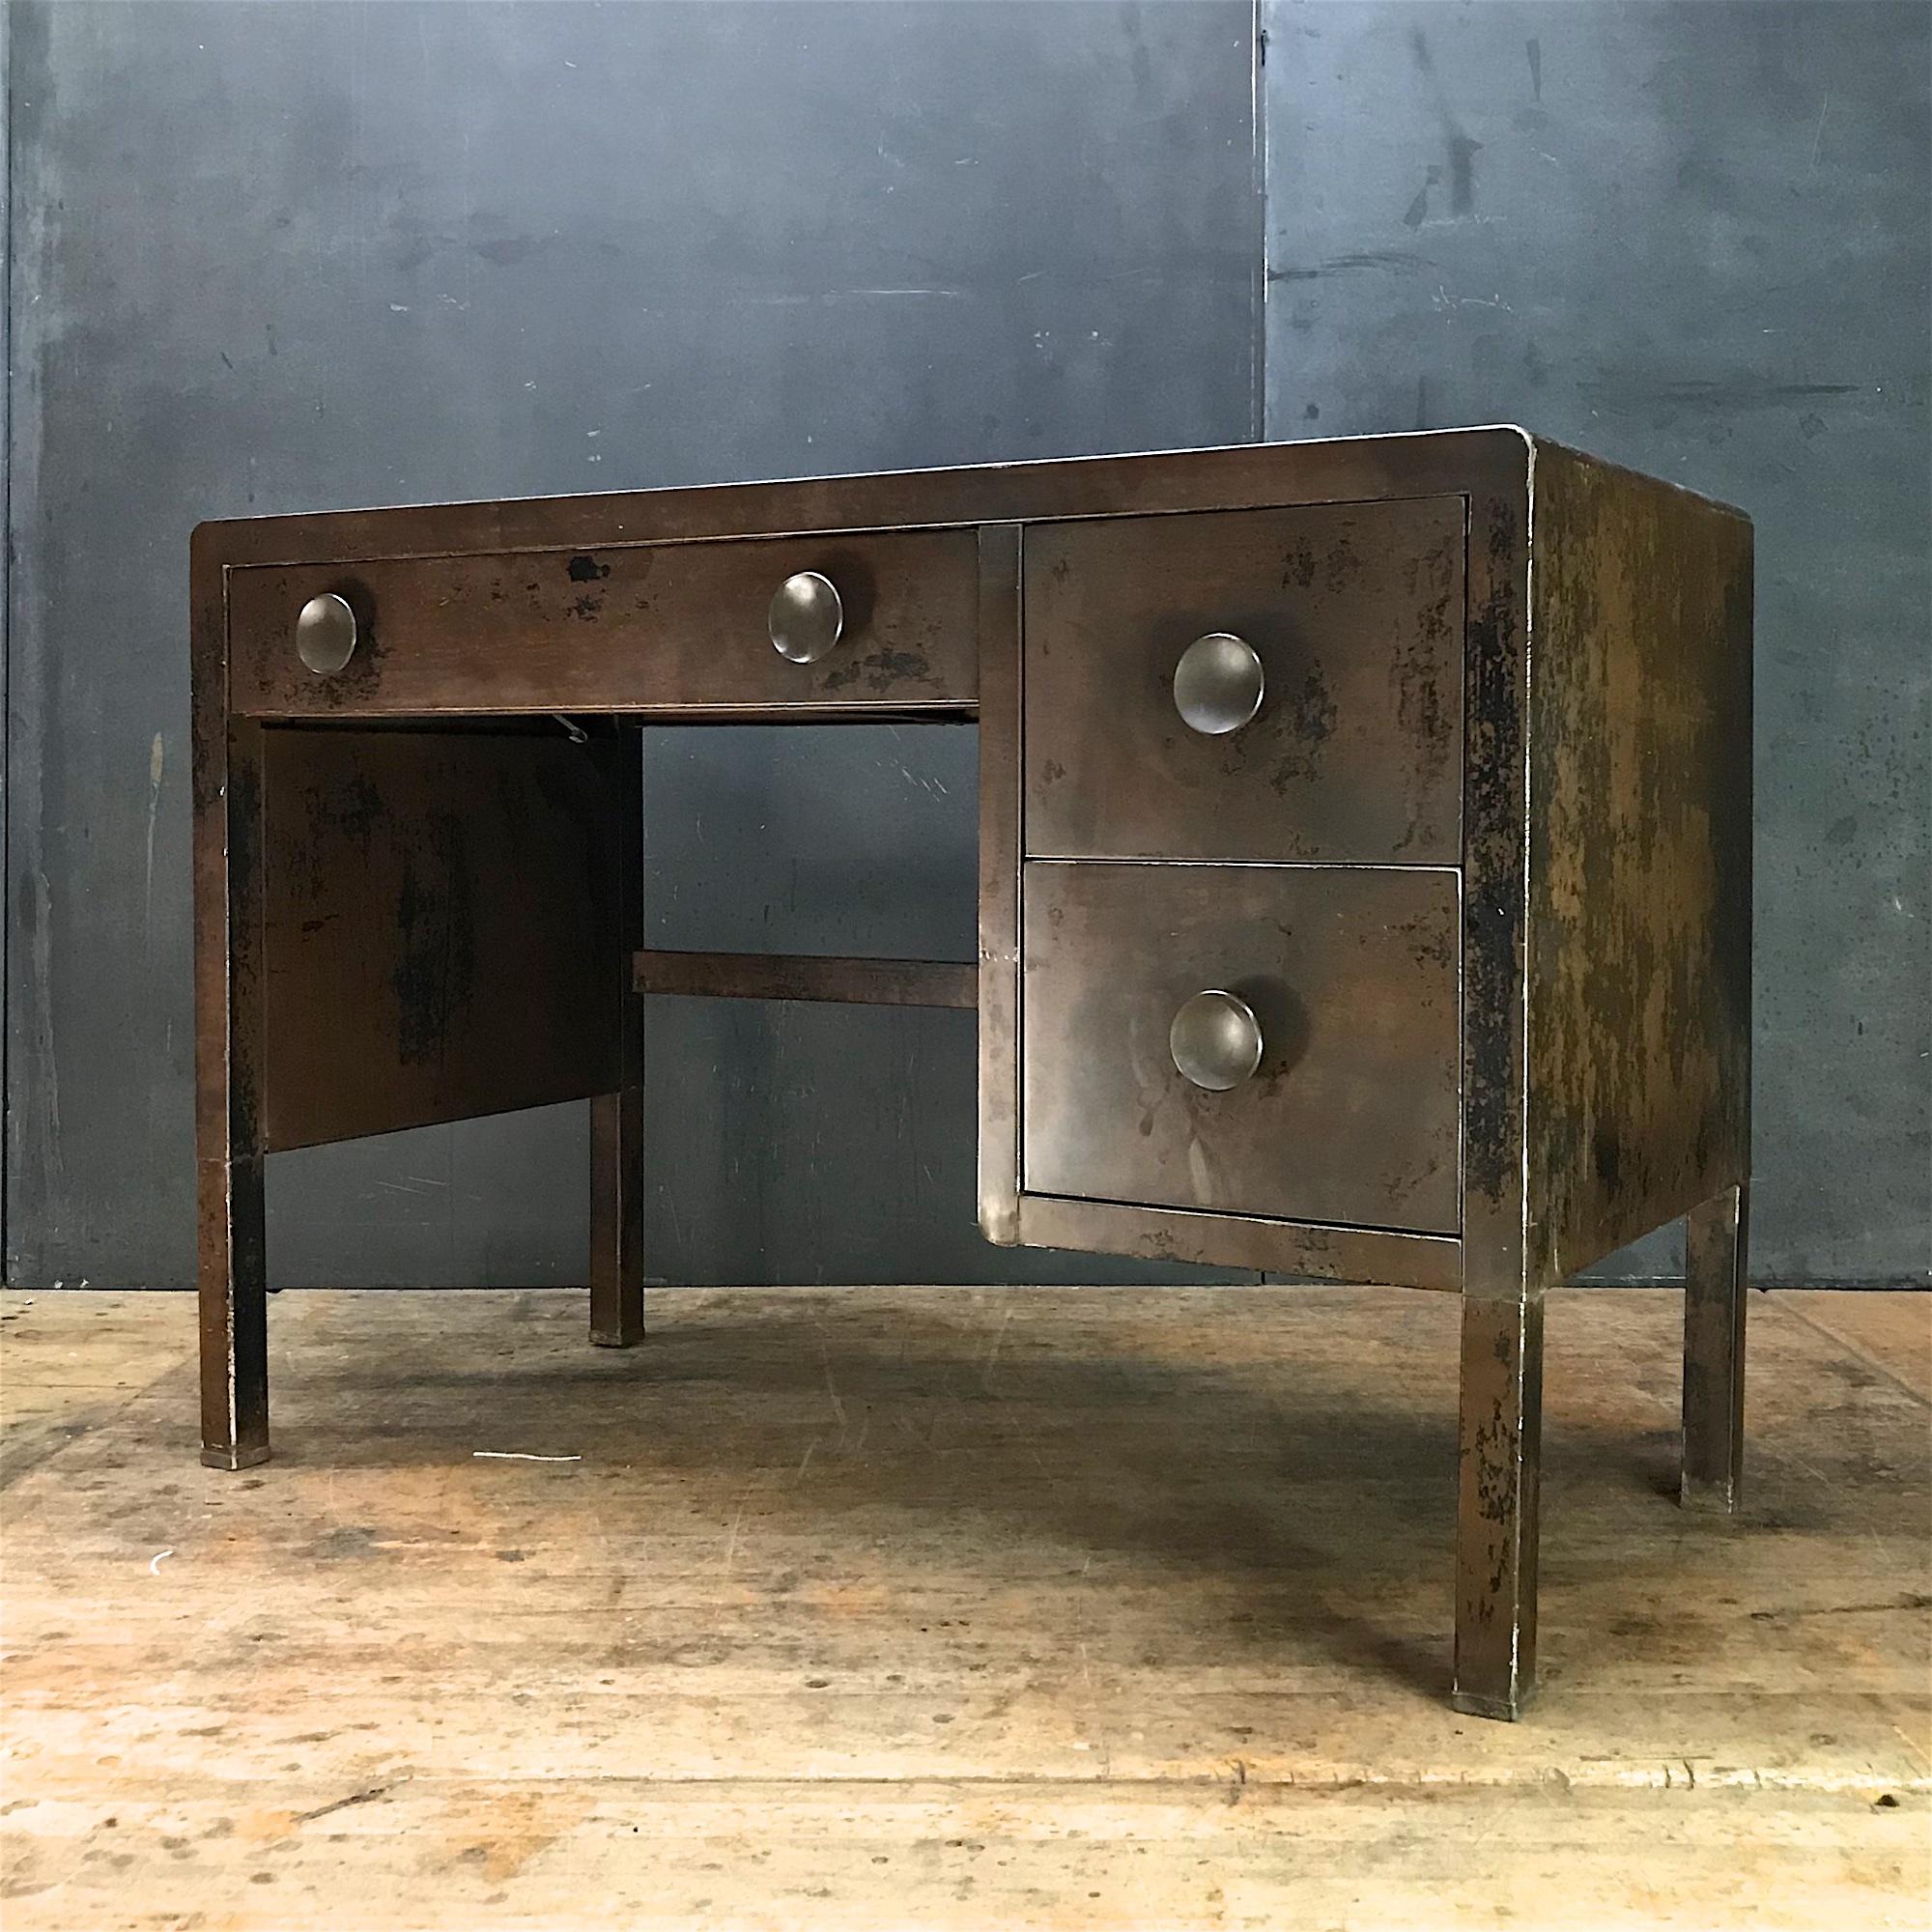 A transitional pre-war design by Norma Bel Geddes, this example is the more minimal version. Fully functional, drawers are working smoothly, metal and wood mechanics, keeps them quiet during function, this is all intact. Please note that the four